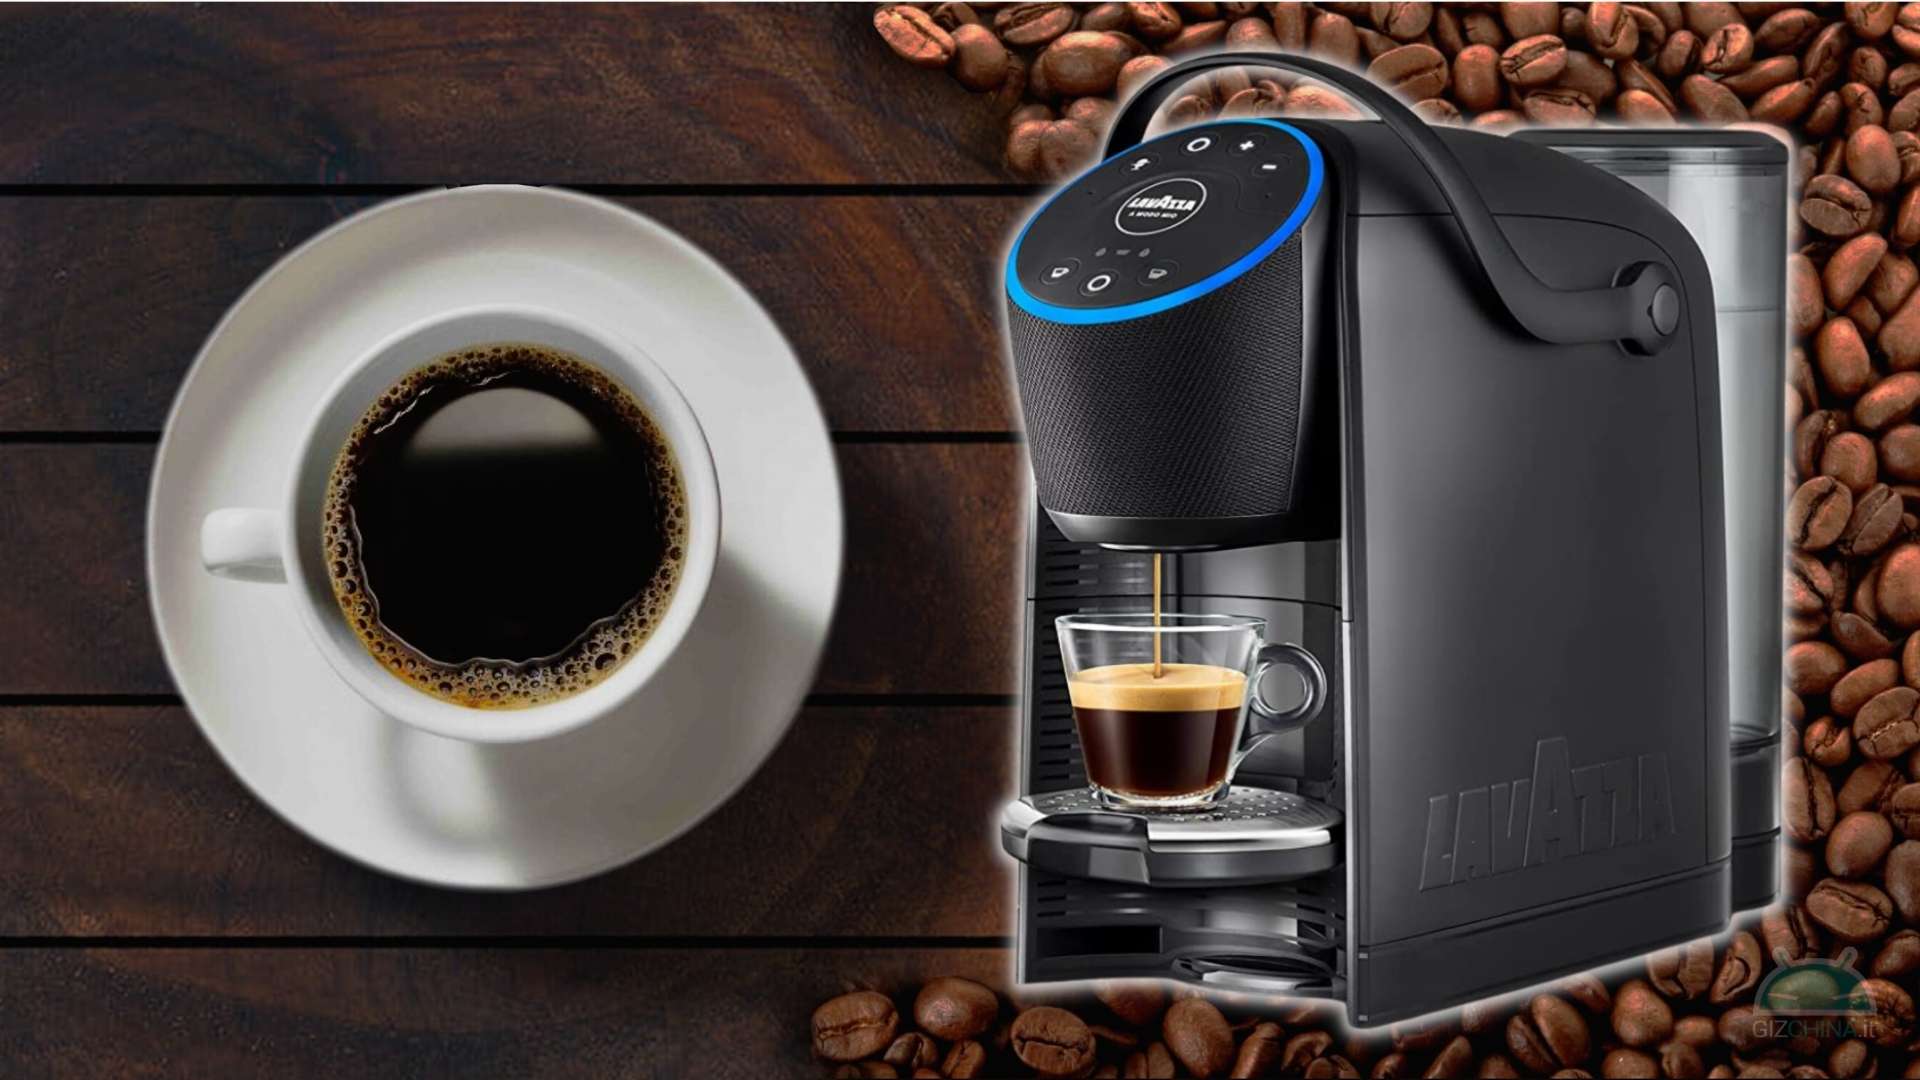 The Lavazza coffee machine with Alexa is close to 40% discount: buy it now!  - GizChina.it